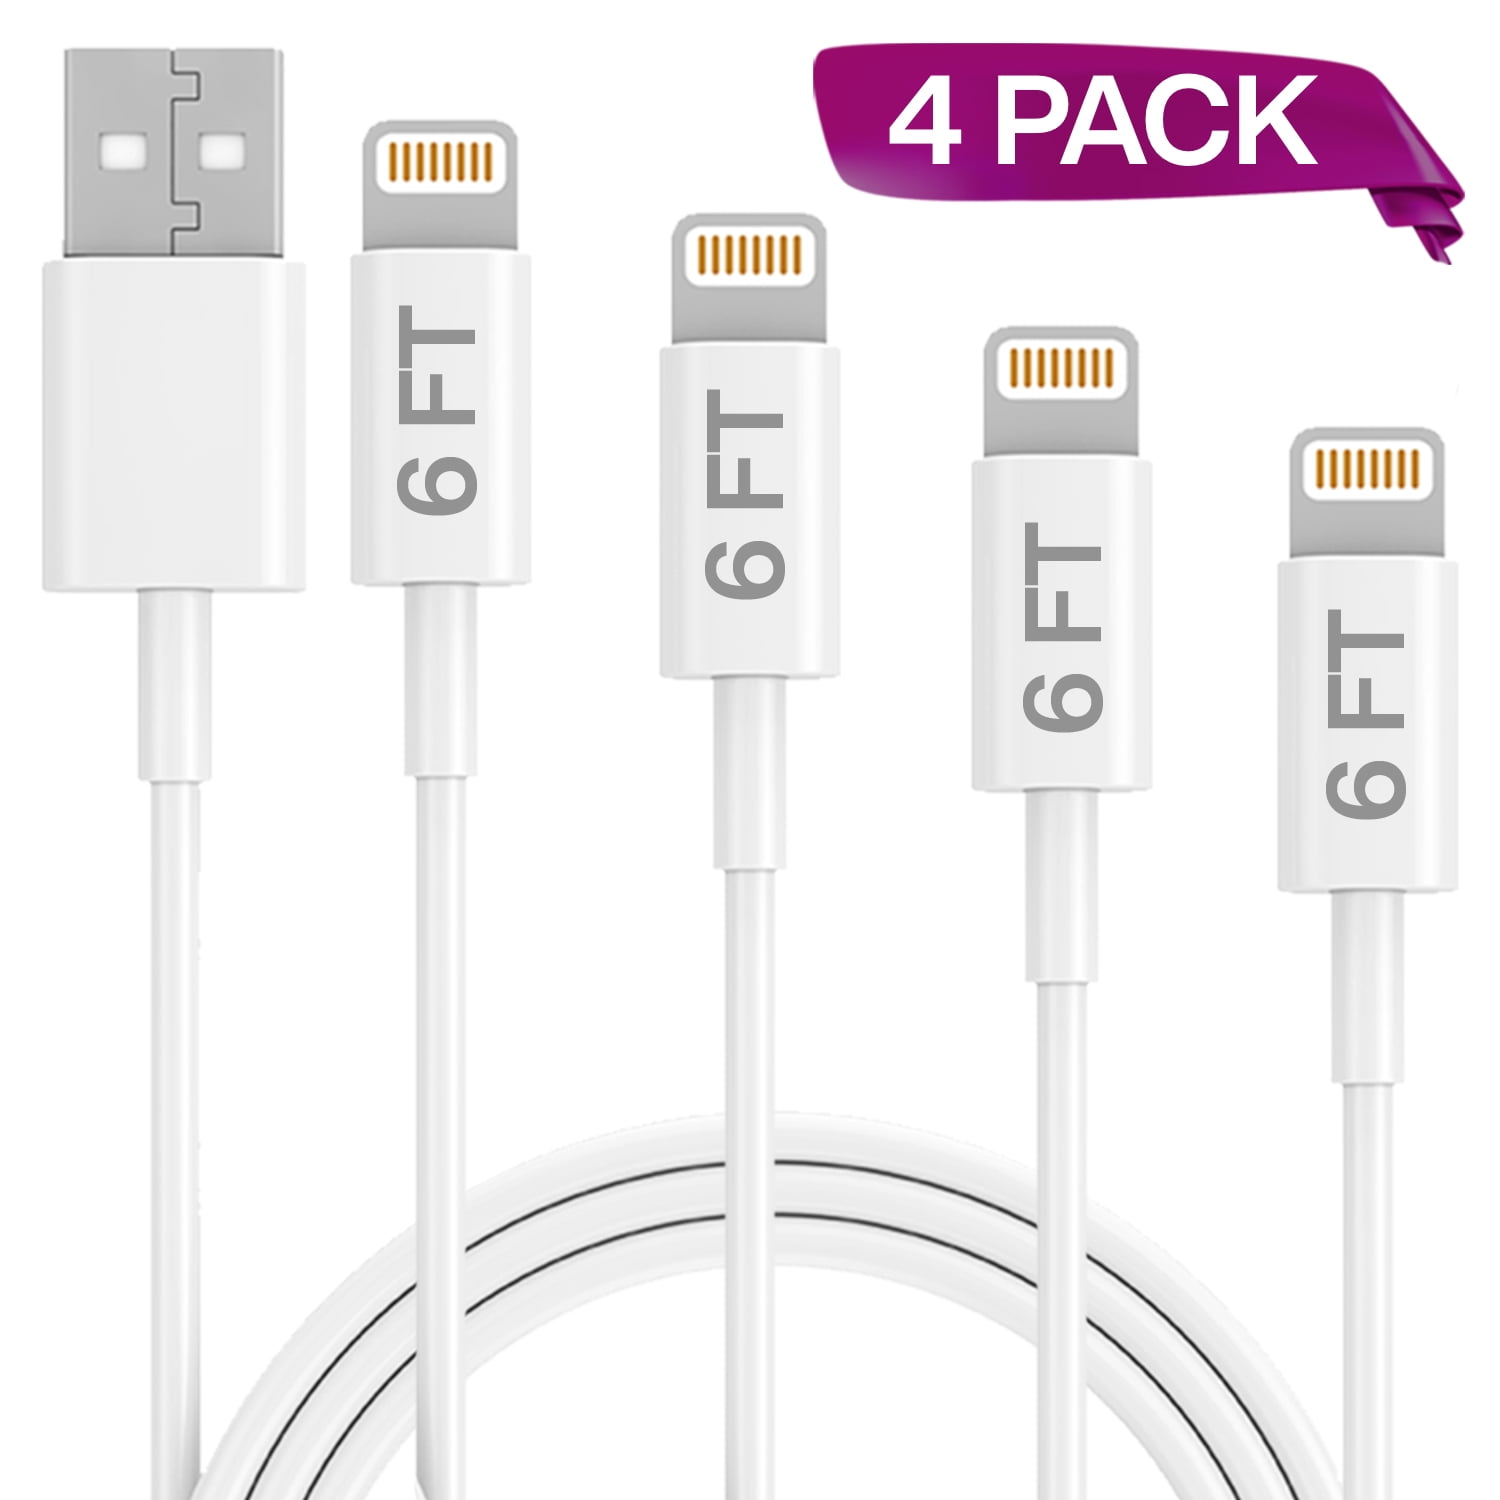 for Apple iPhone Xs/Xs Max/XR/X/8/8 Plus/7/7 Plus/6S/6S Plus/Air/Mini/iPod Touch/Case 3 Pack 6FT USB Cable Charging & Syncing Cord Infinite Power iPhone Charger MFI Certified Lightning Cable Set 